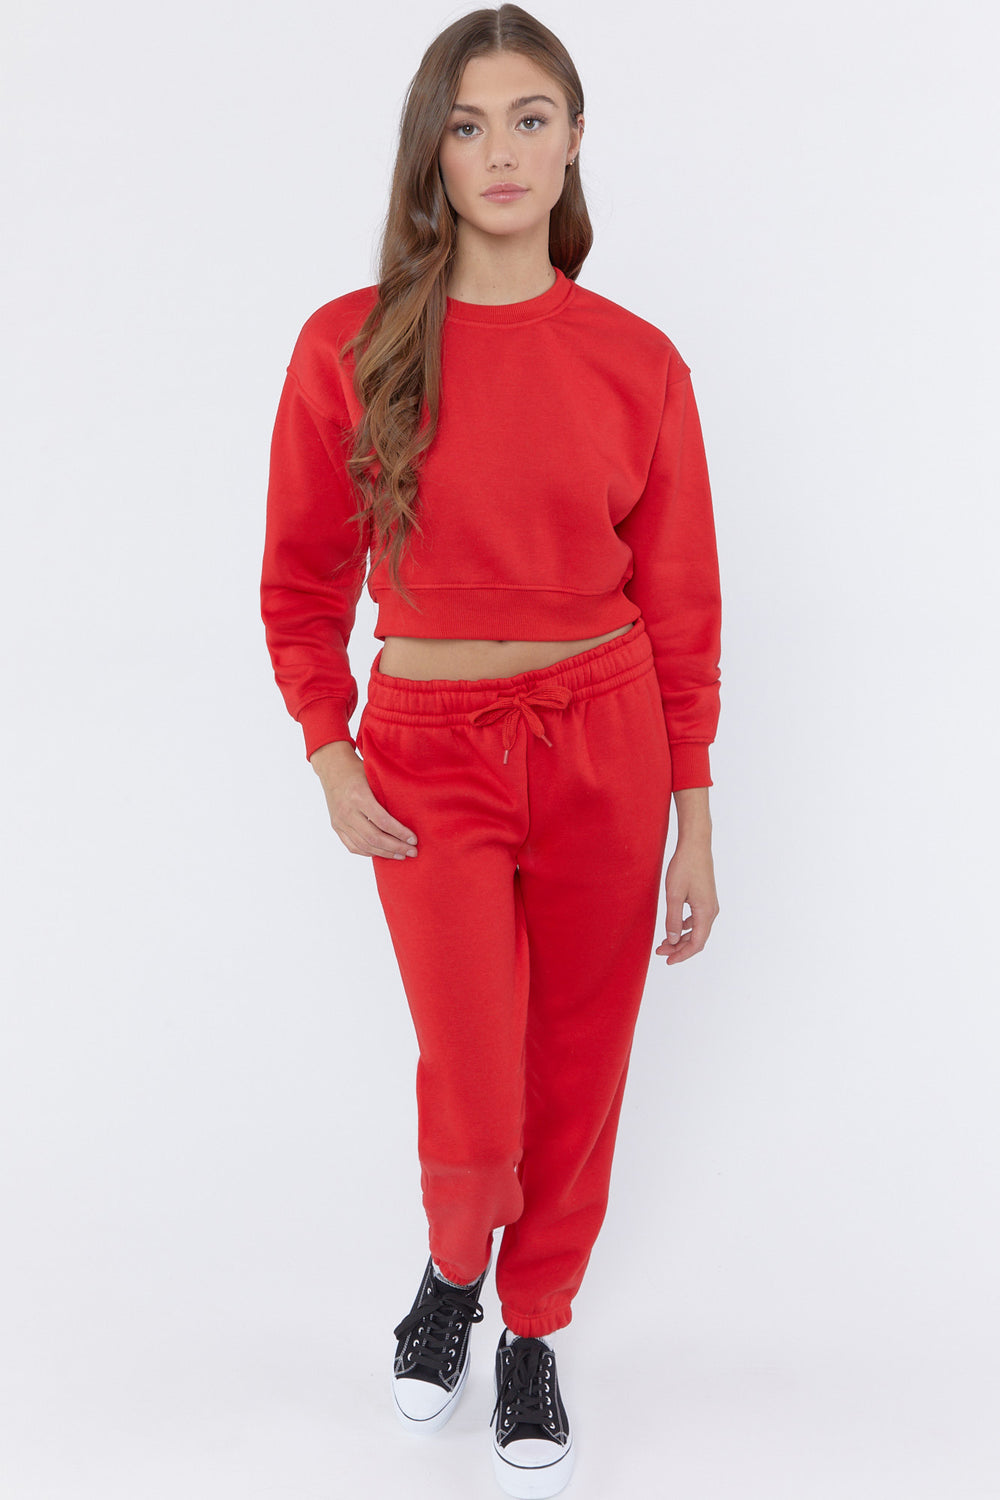 Fleece Crewneck Cropped Pullover Red